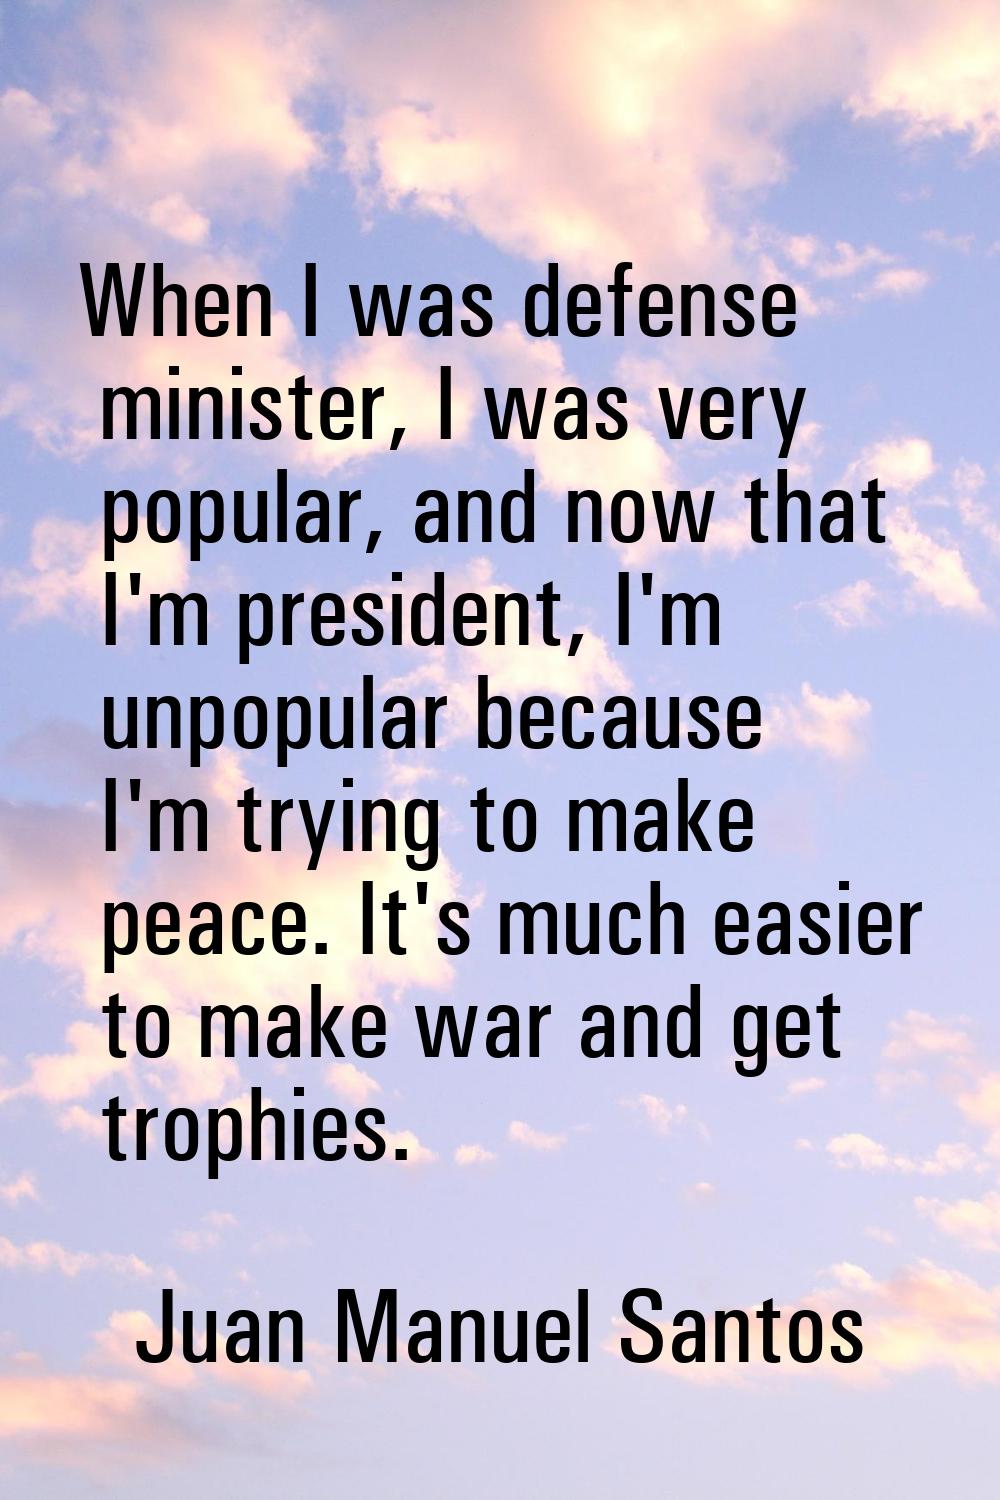 When I was defense minister, I was very popular, and now that I'm president, I'm unpopular because 